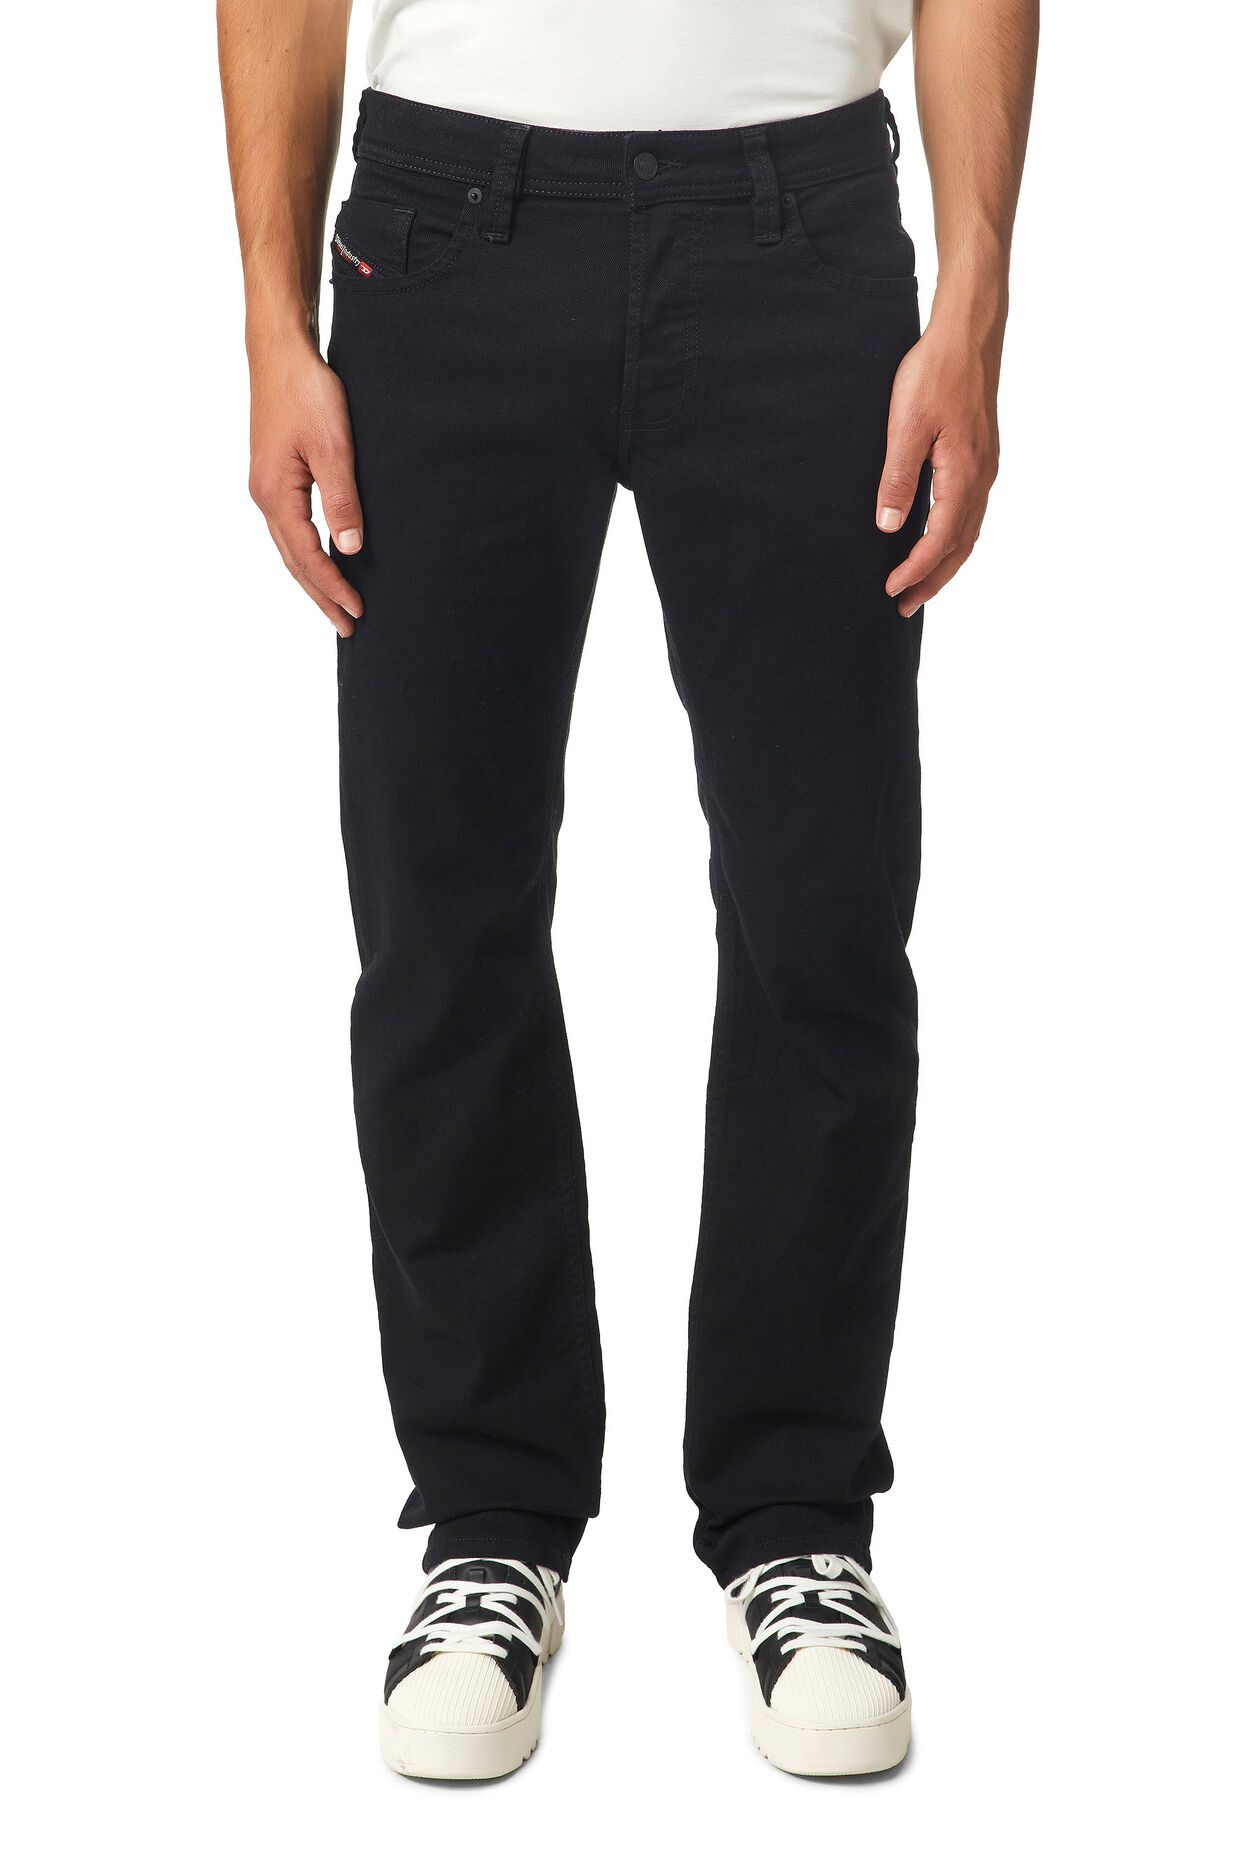 Diesel D-Mihtry 009HA Straight Sreatch Jeans - Esquire Clothing